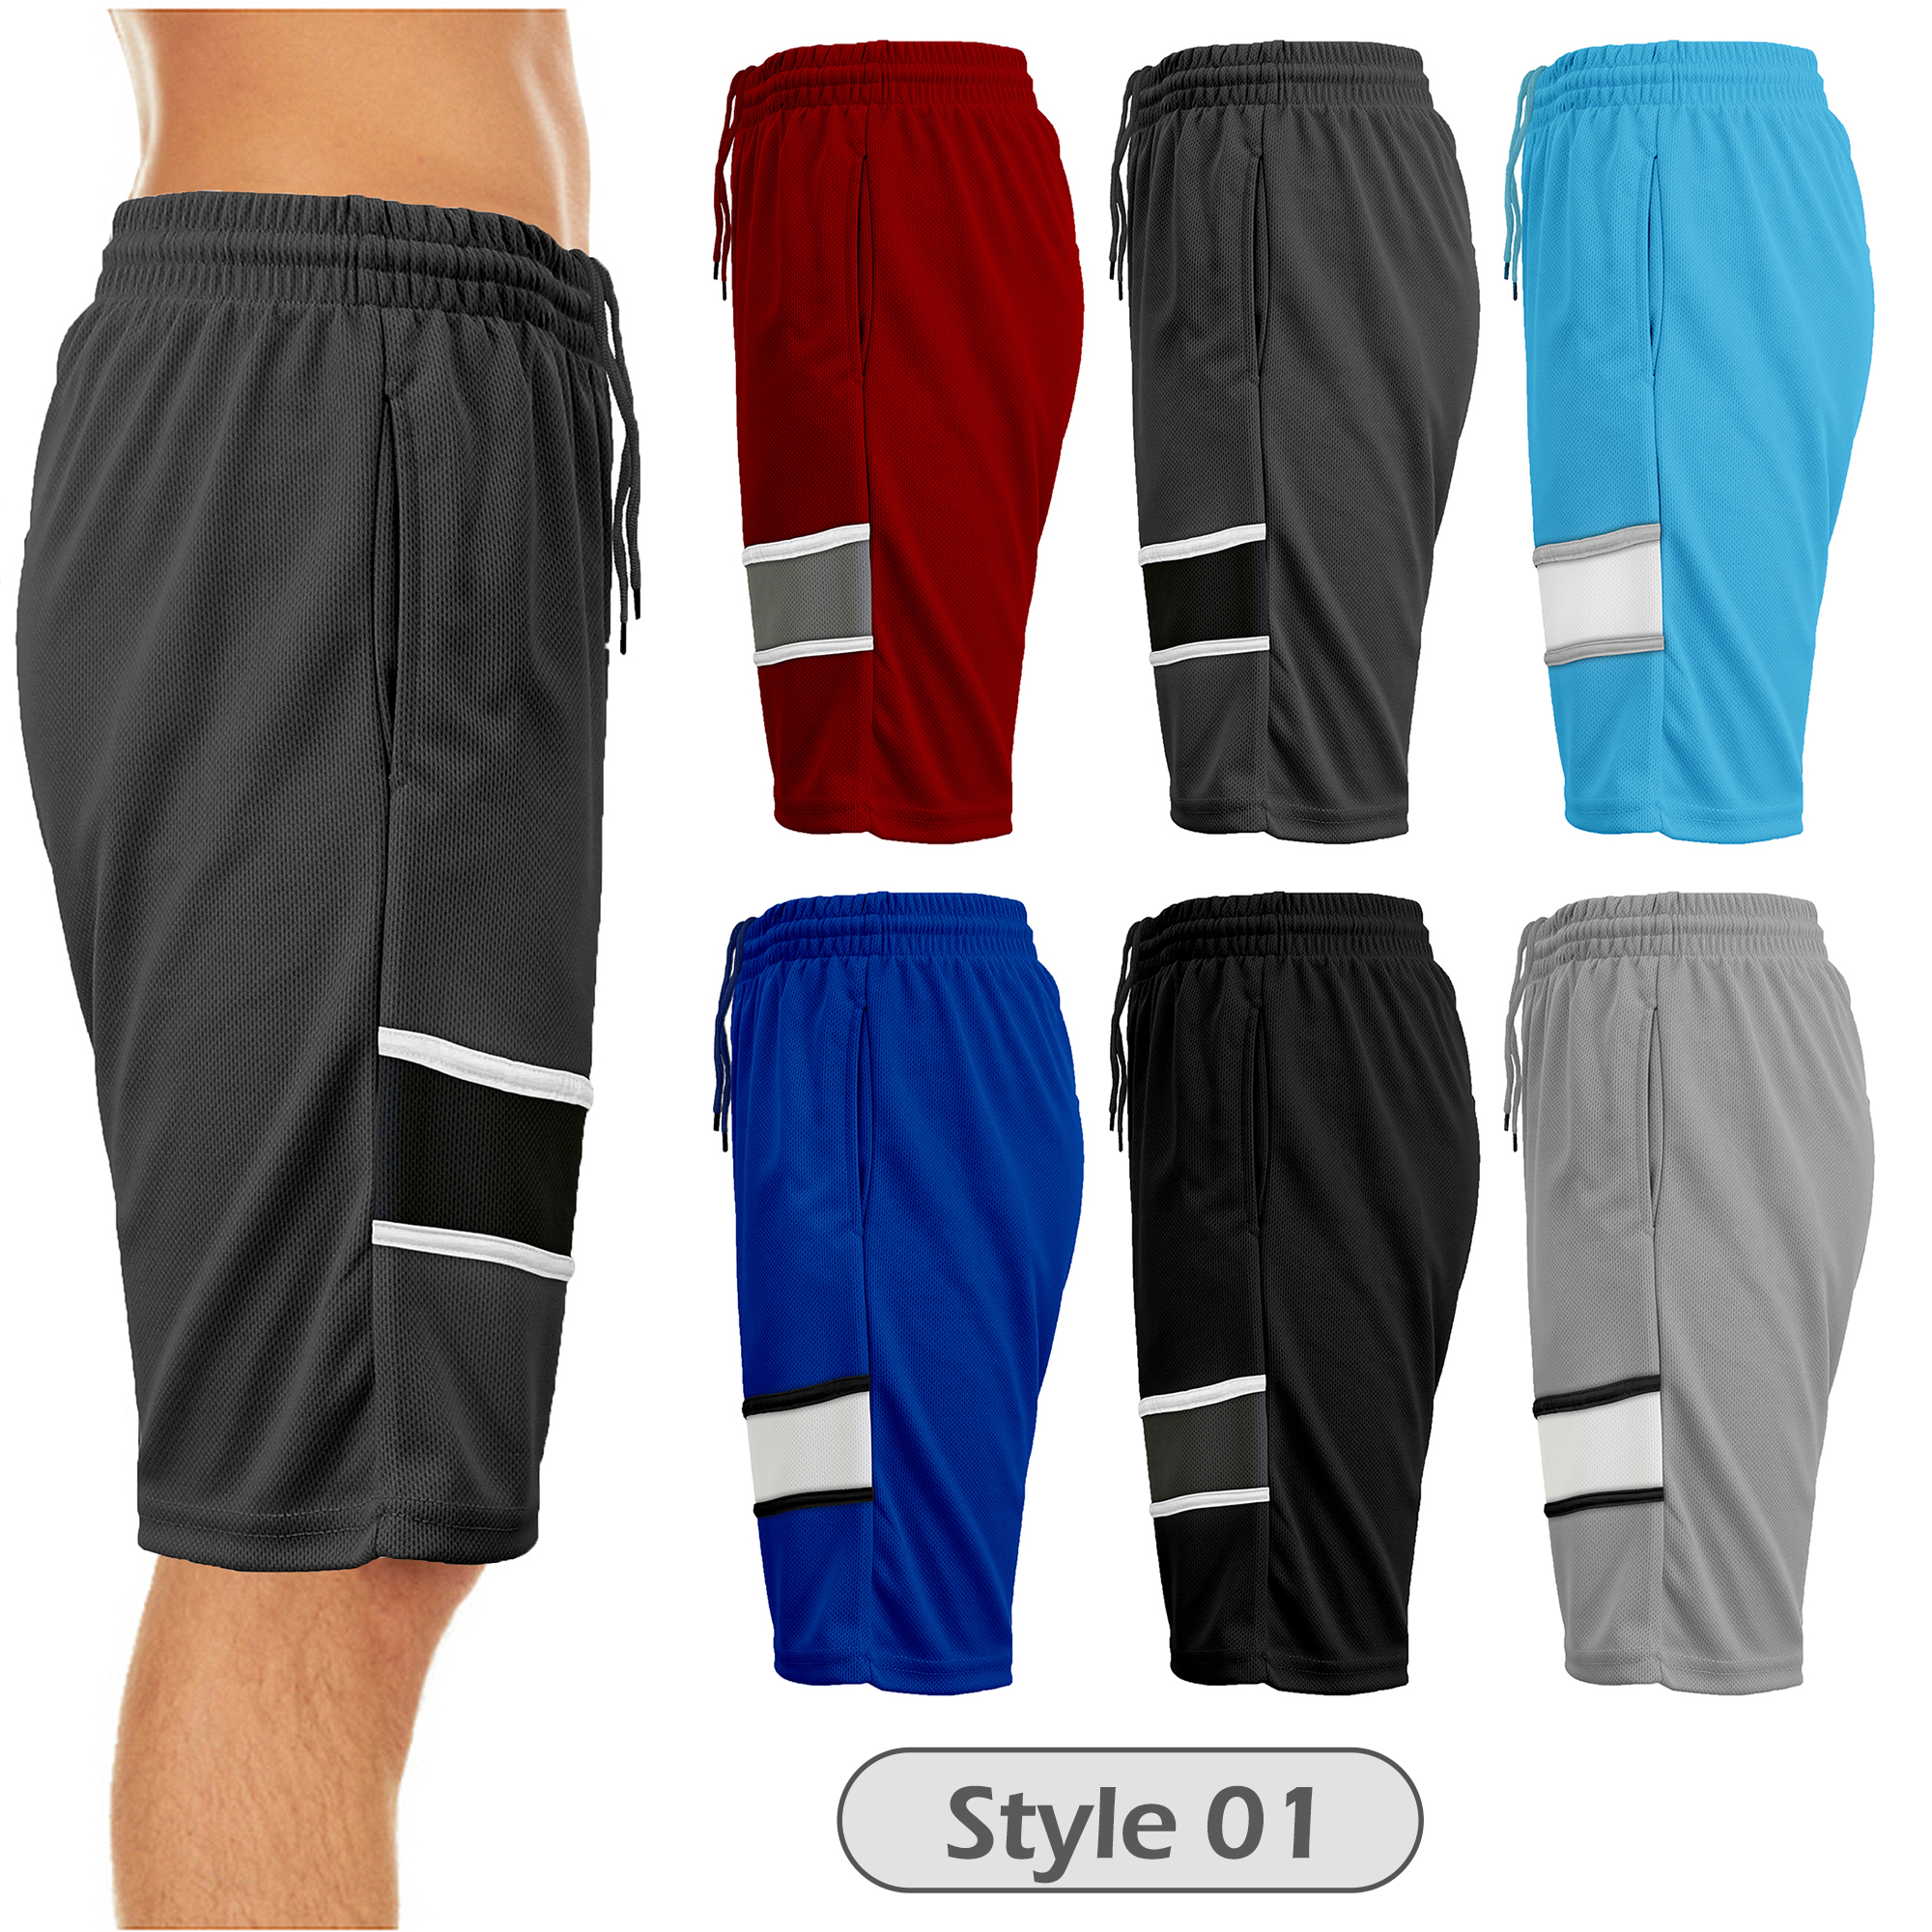 5-Pack: Men's Active Moisture-Wicking Mesh Performance Shorts (S-2XL) - Assorted, X-Large